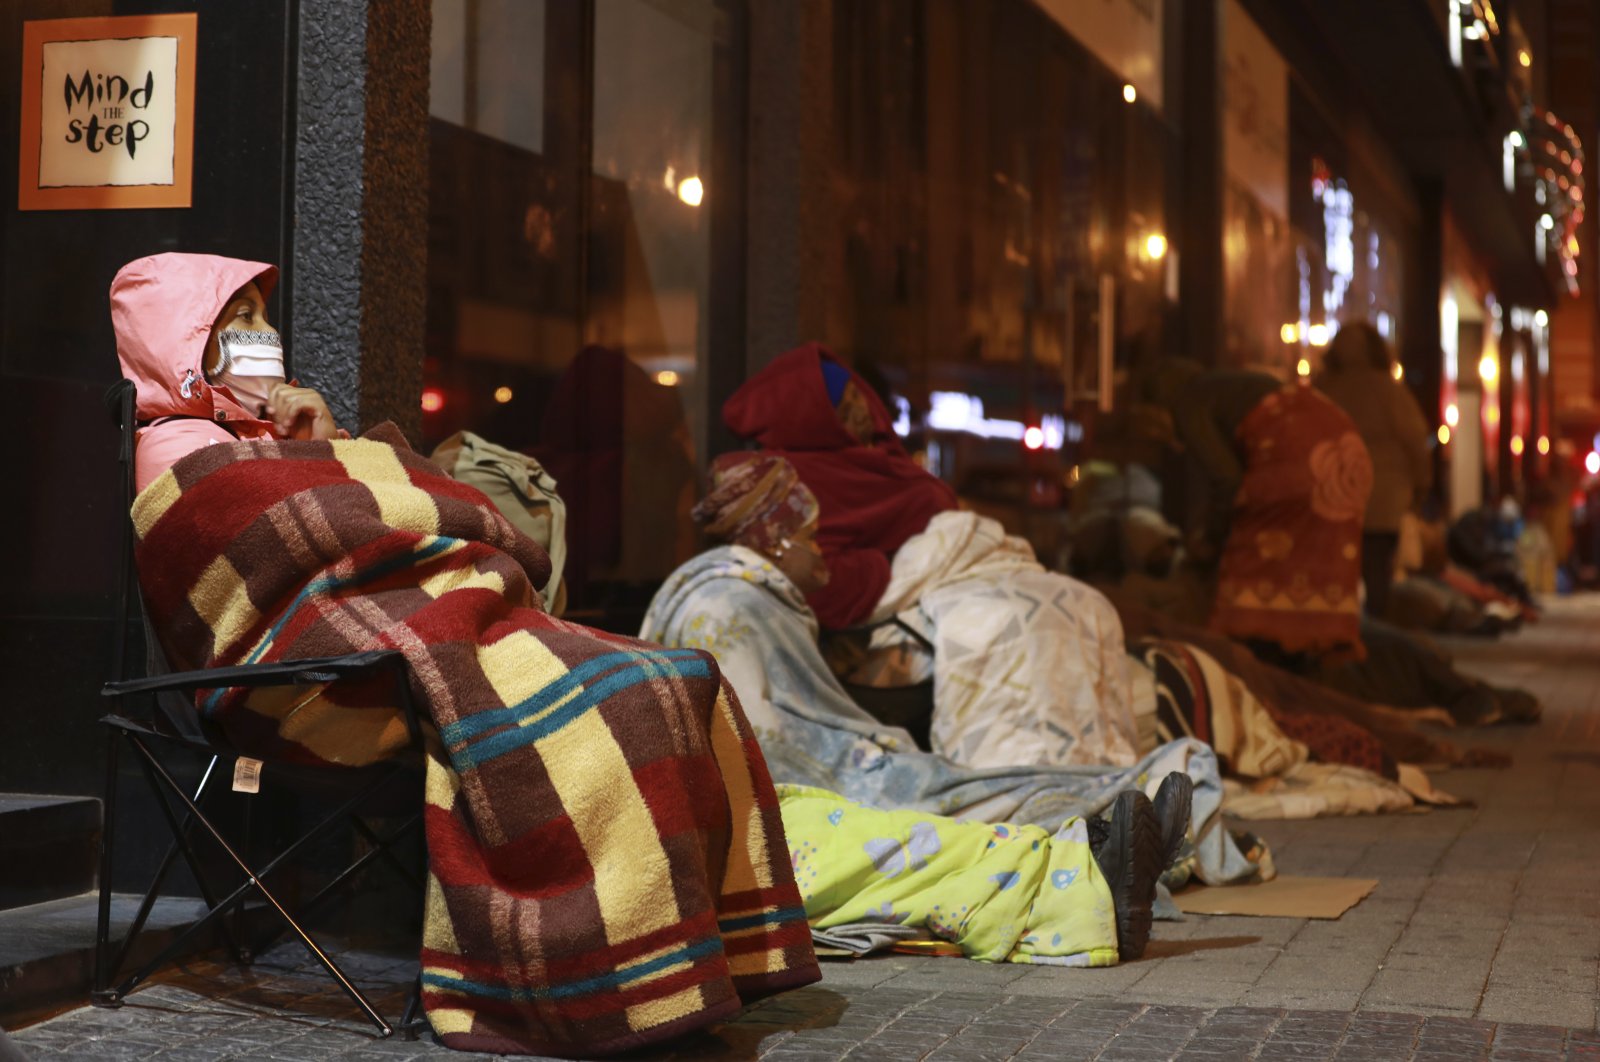 Women who had queued overnight to apply for government grants wait for the offices to open Thursday morning, Cape Town, South Africa, May 28, 2020. (AP Photo)